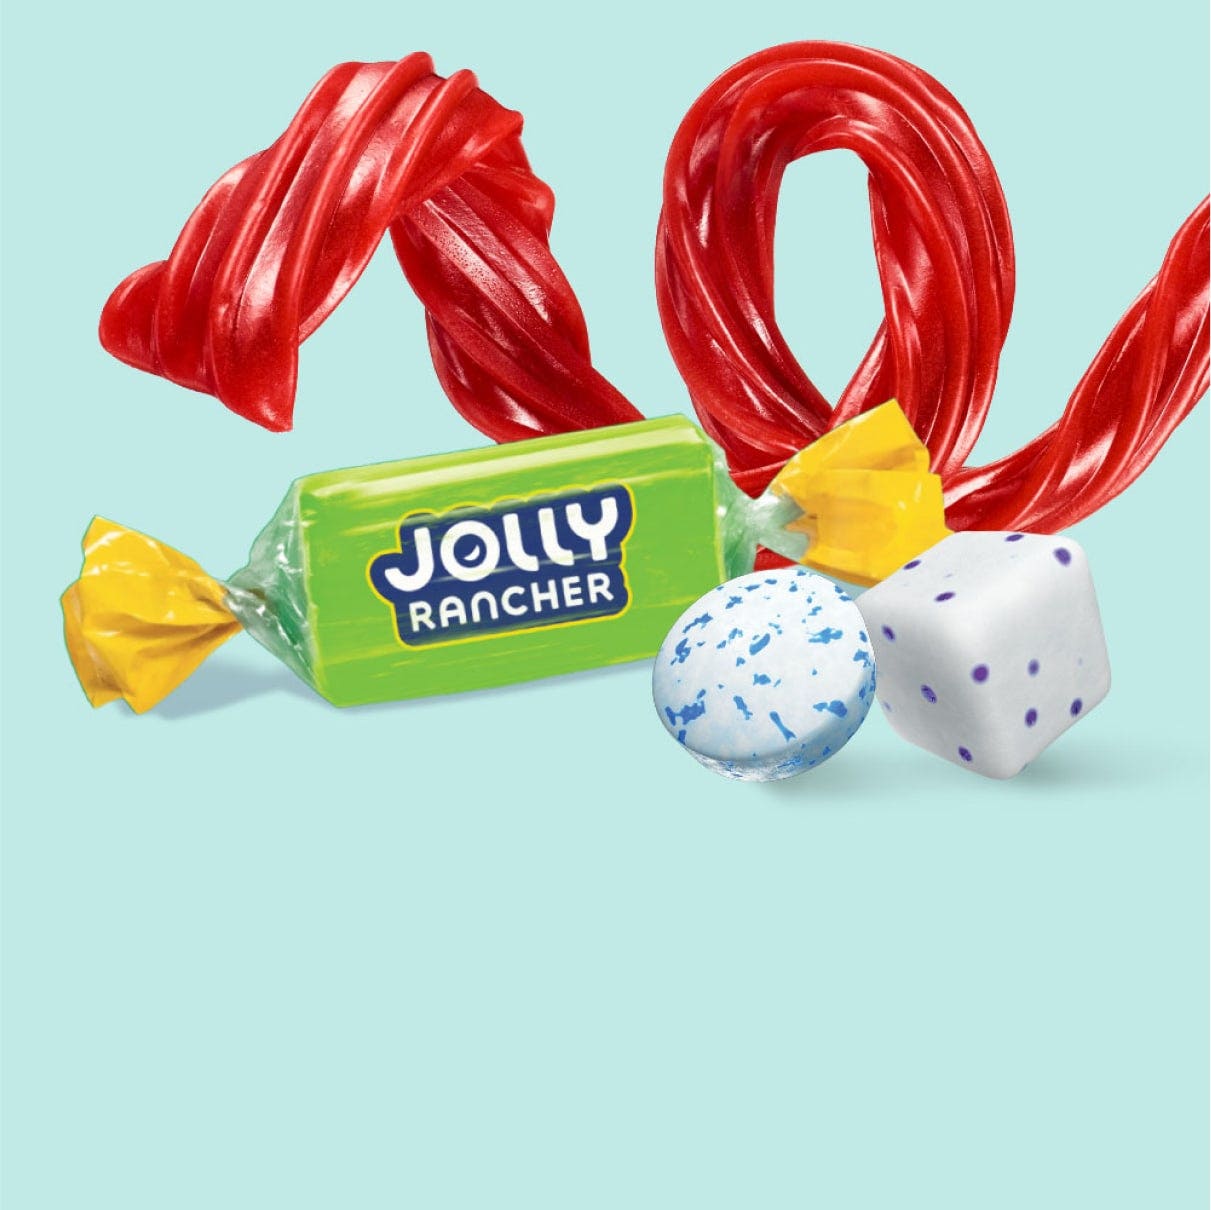 Jolly Rancher, Twizzlers, Ice Breakers candies